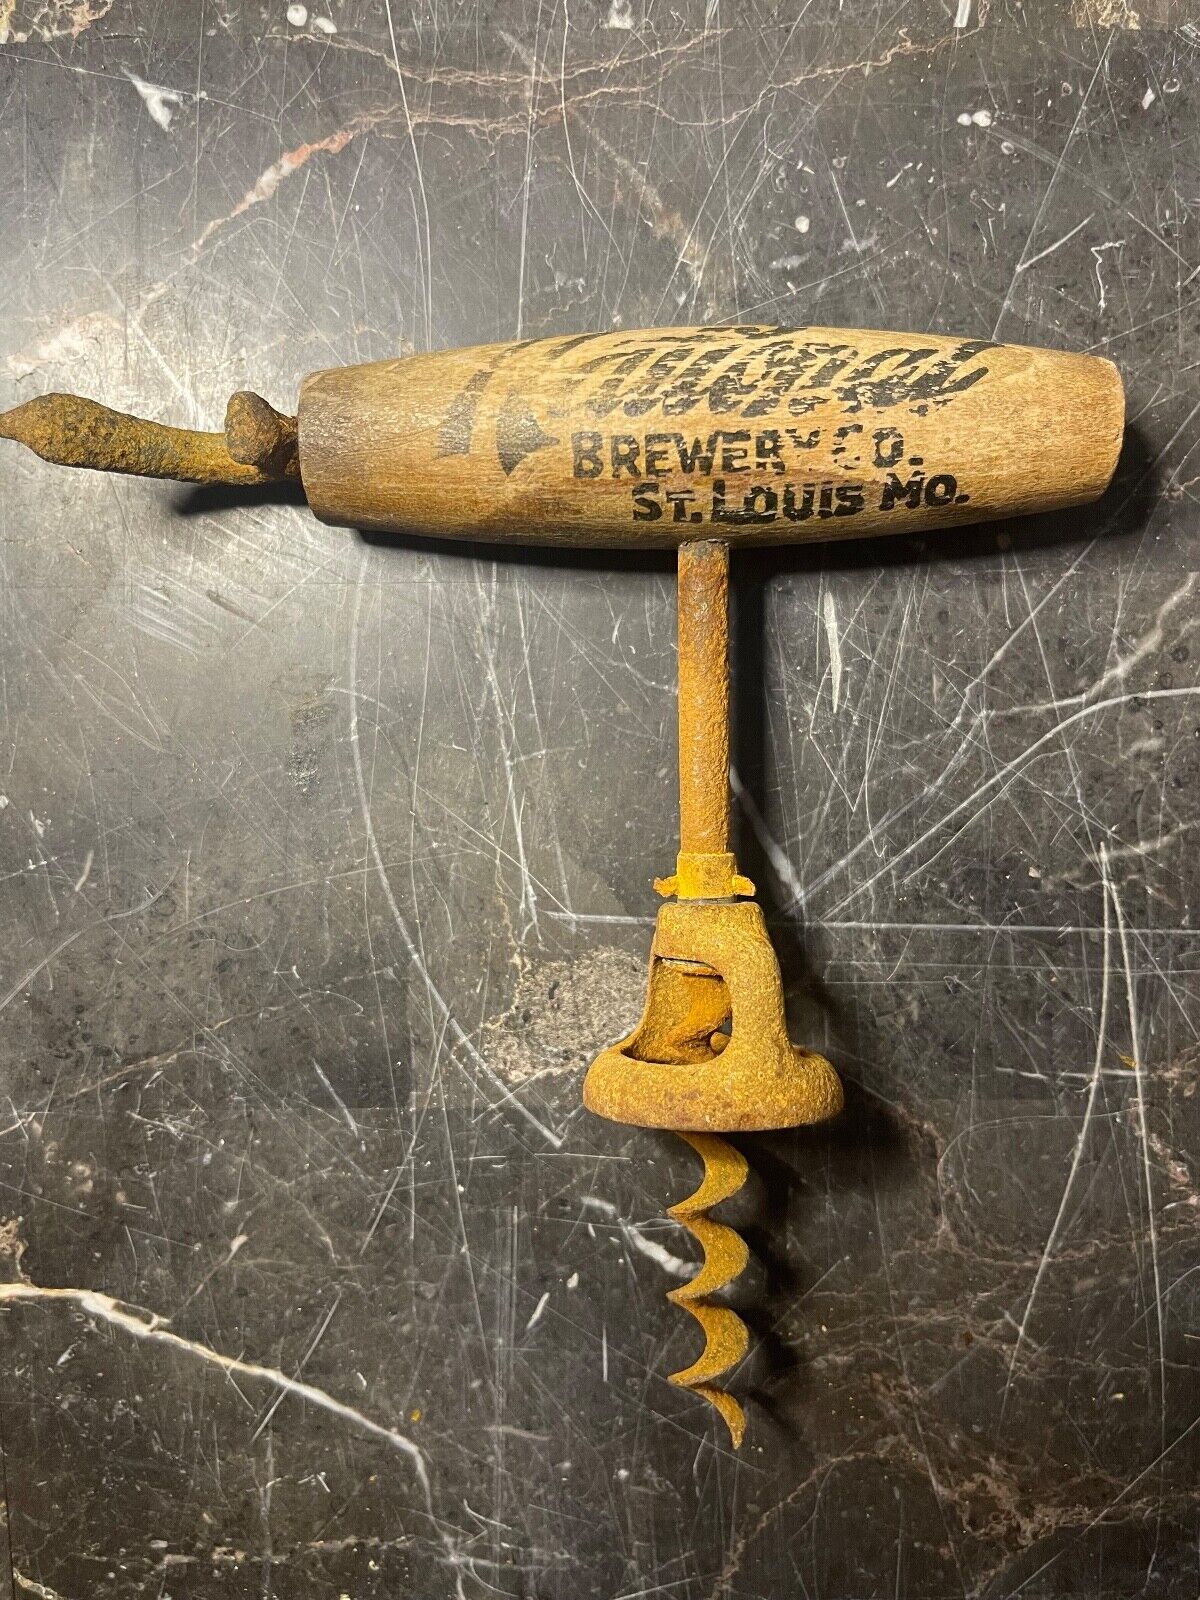 PreProhibition Griesedieck National Brewery St. Louis, MO Corkscrew Beer Opener